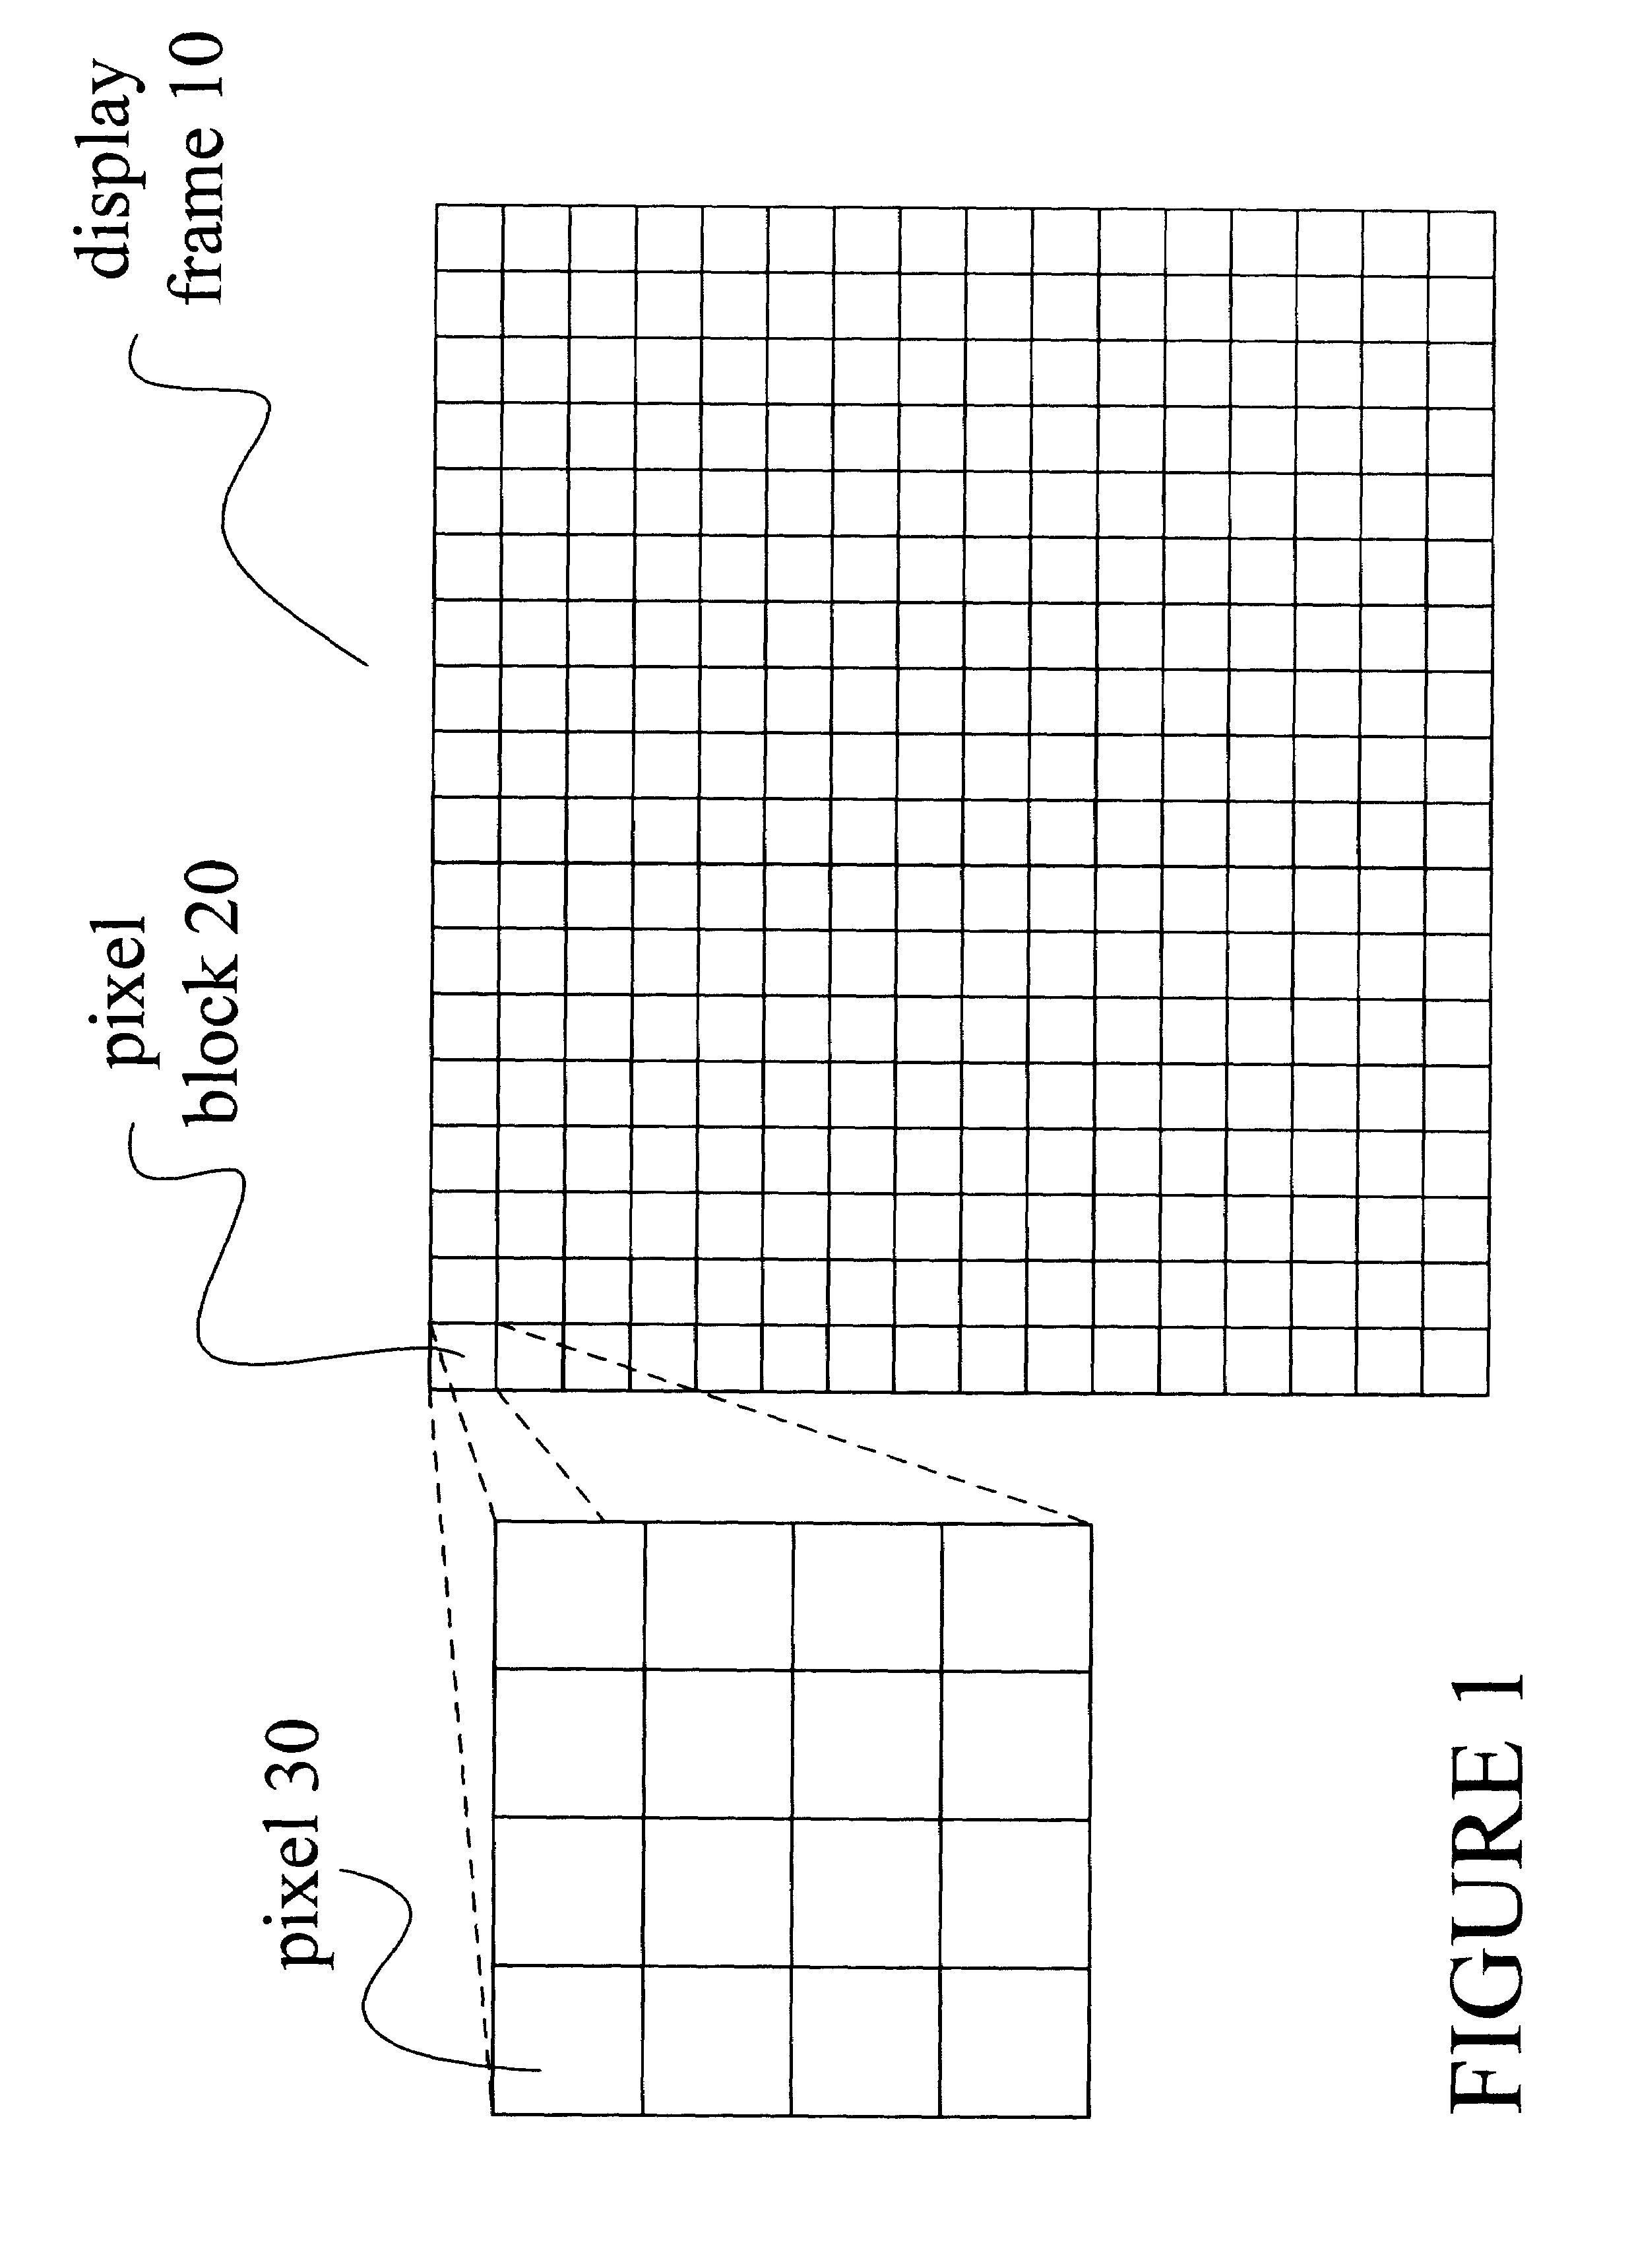 System, method, and apparatus for multi-level hierarchical Z buffering